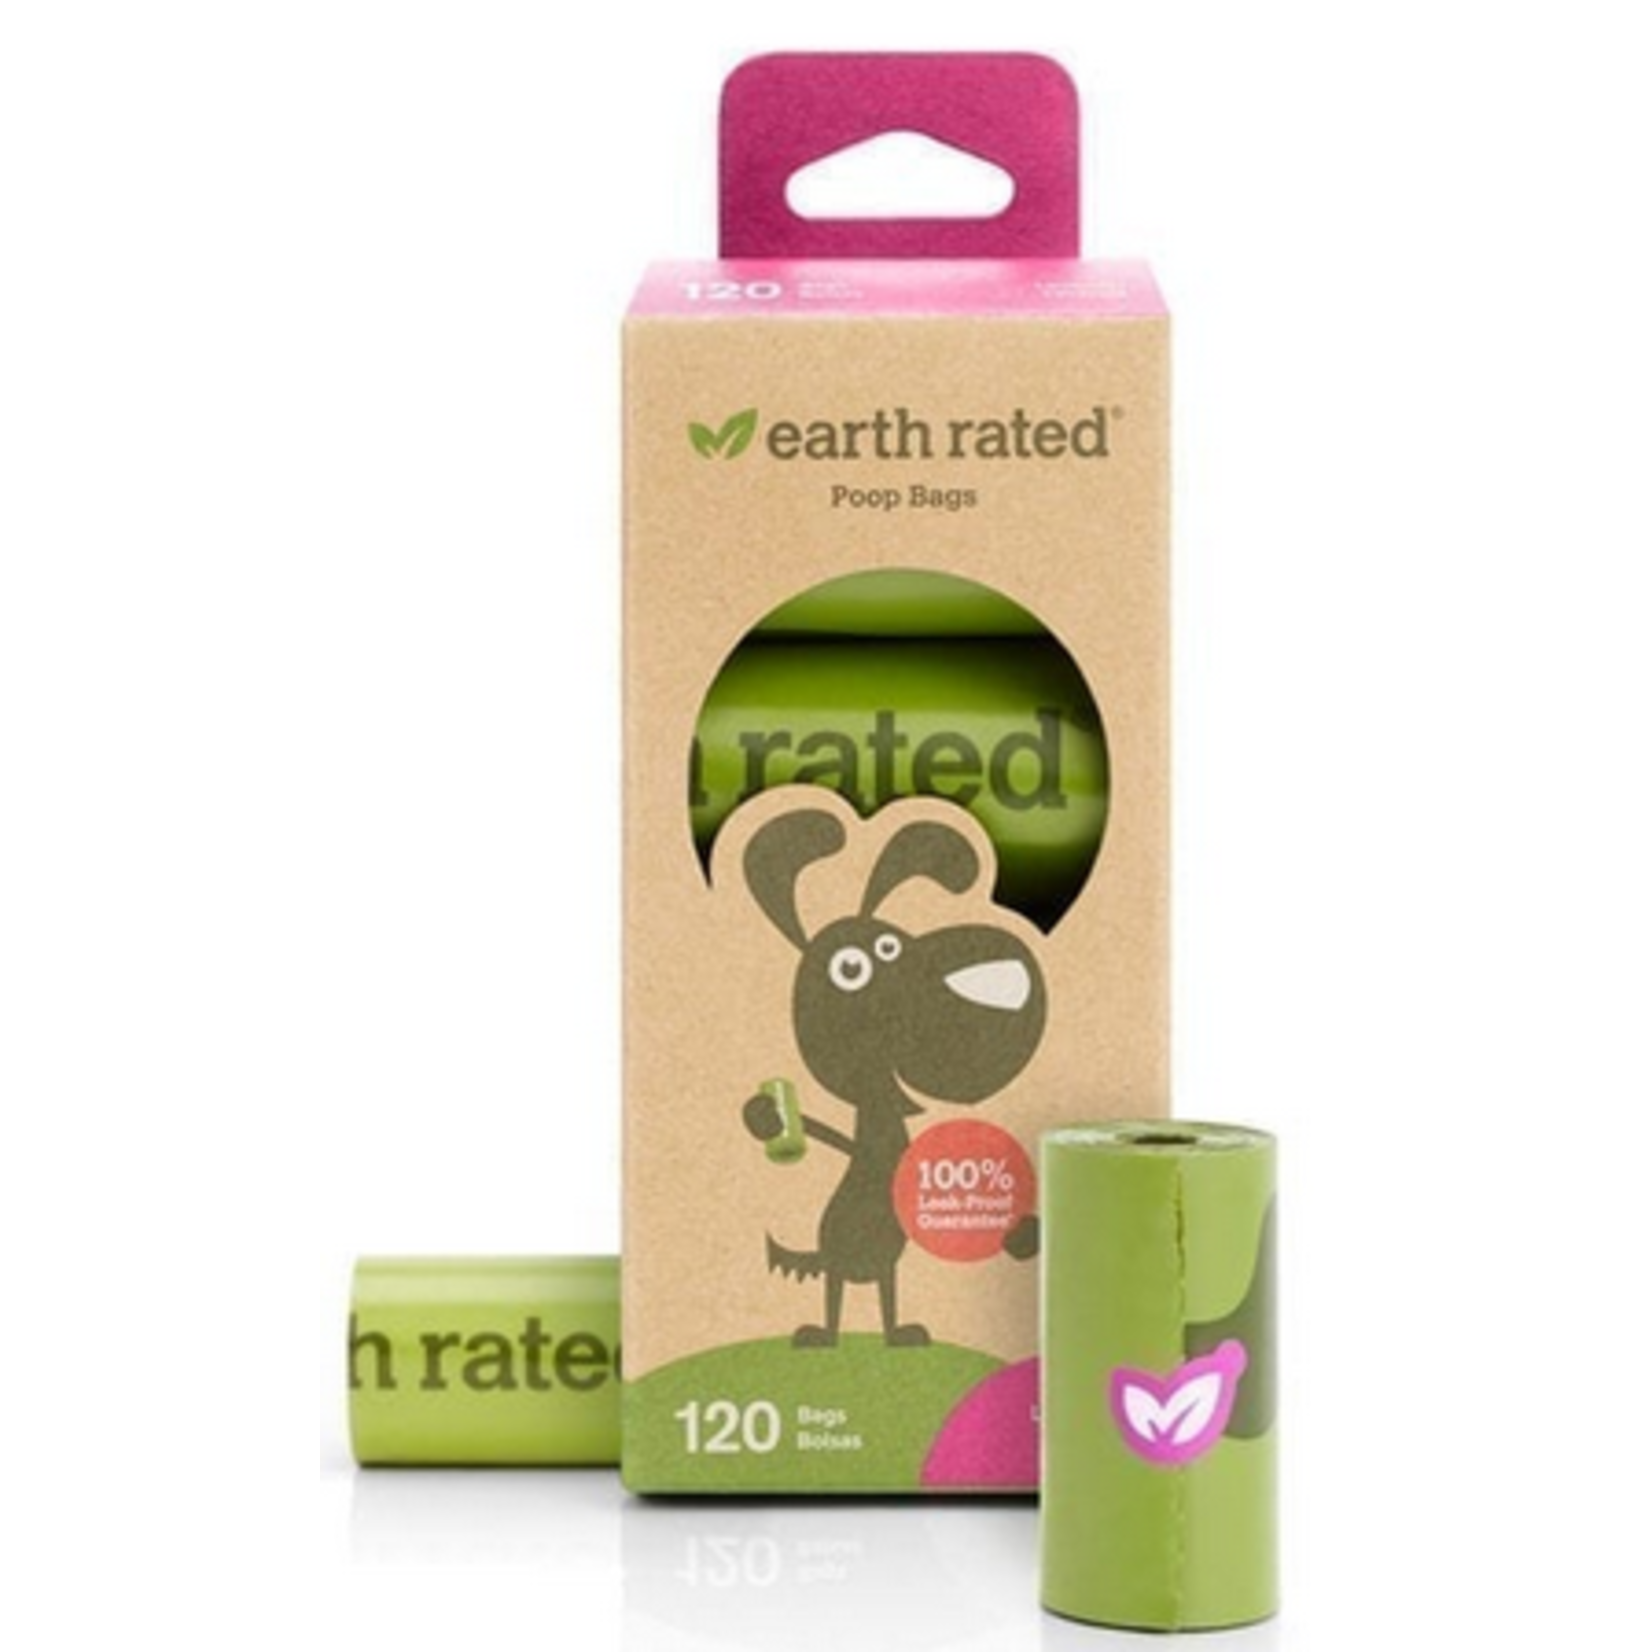 Earth Rated Earth Rated Poop Bags Lavender 8 roll, 120ct